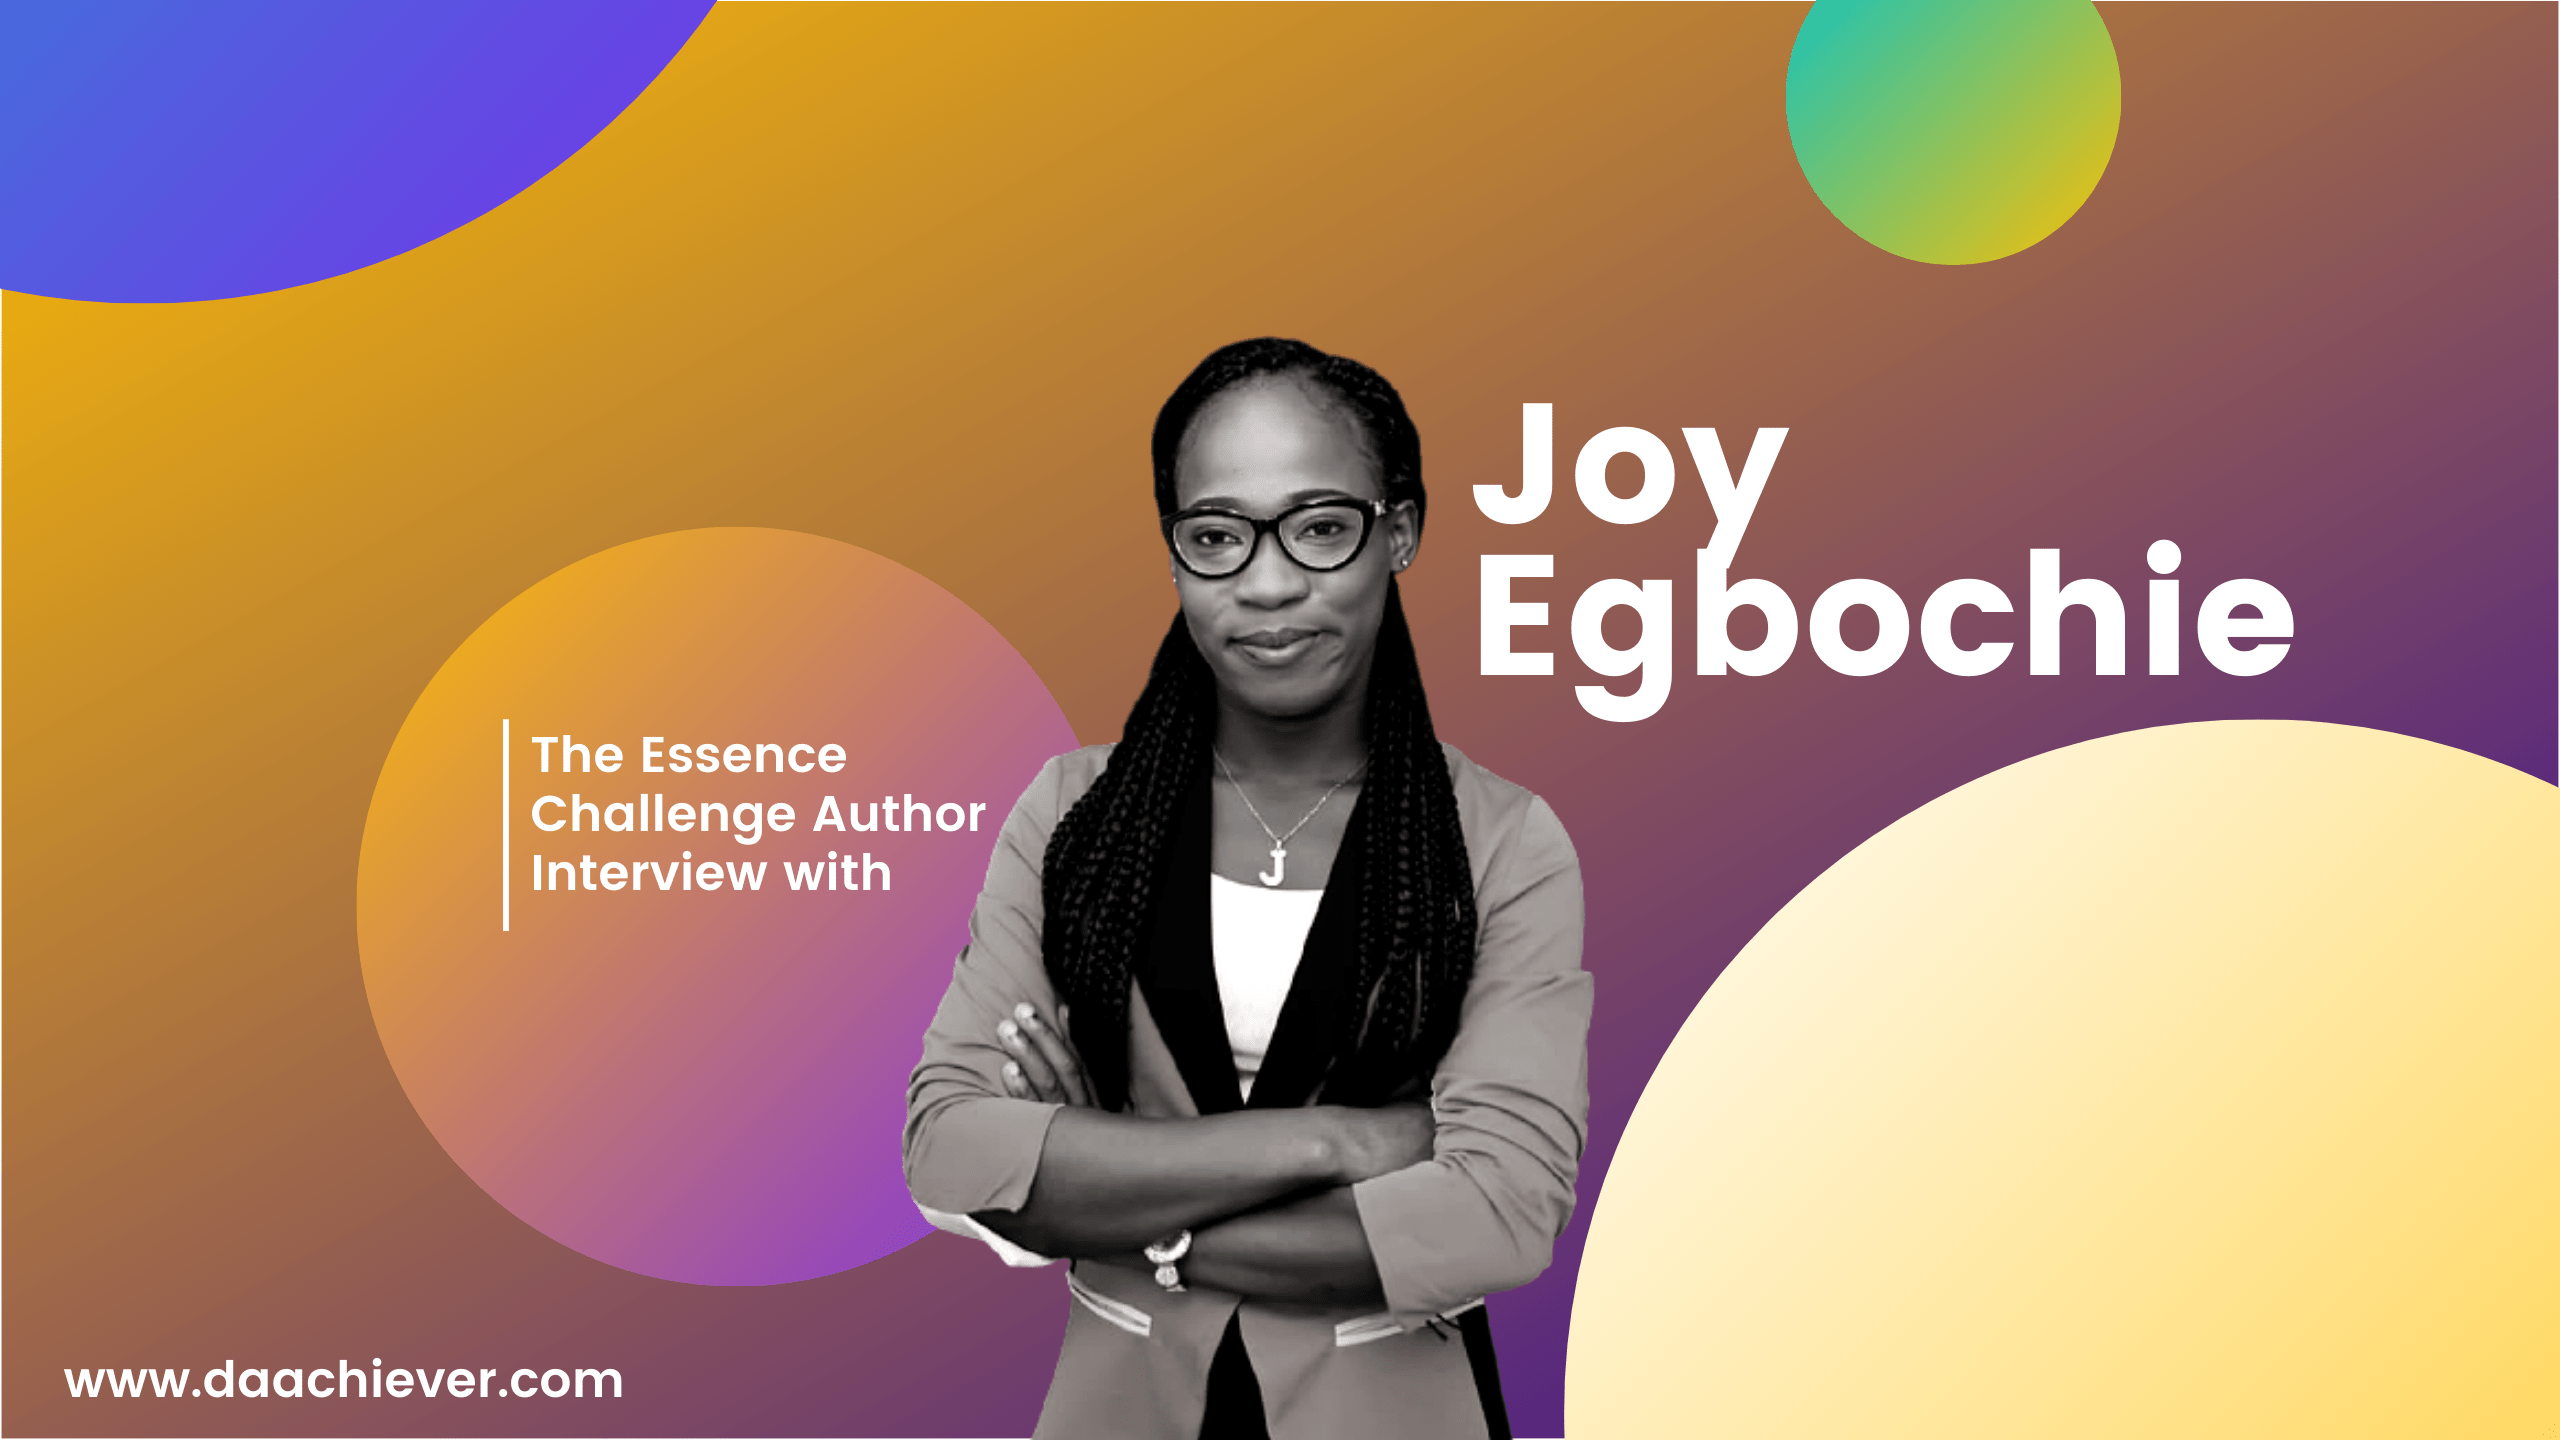 The Christian Author Interview with Joy Egbochie